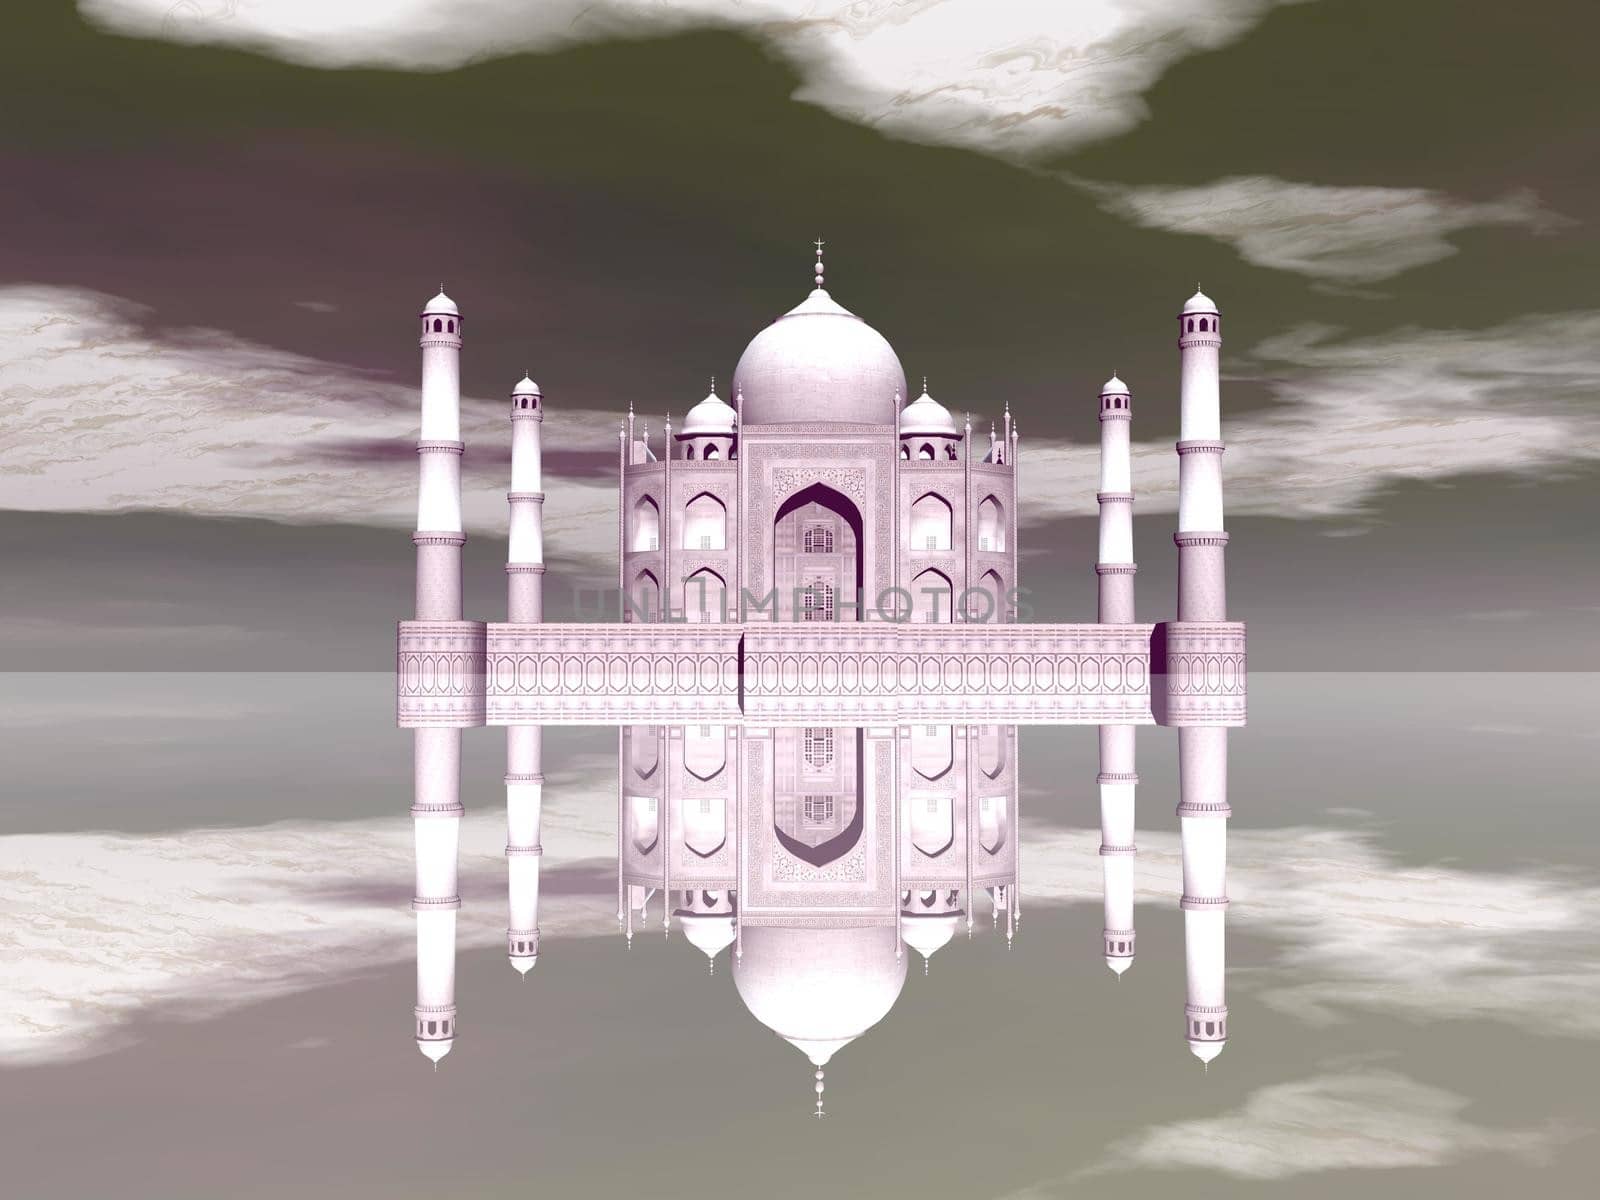 Famous Taj Mahal mausoleum and its mirror reflection by day, Agra, India